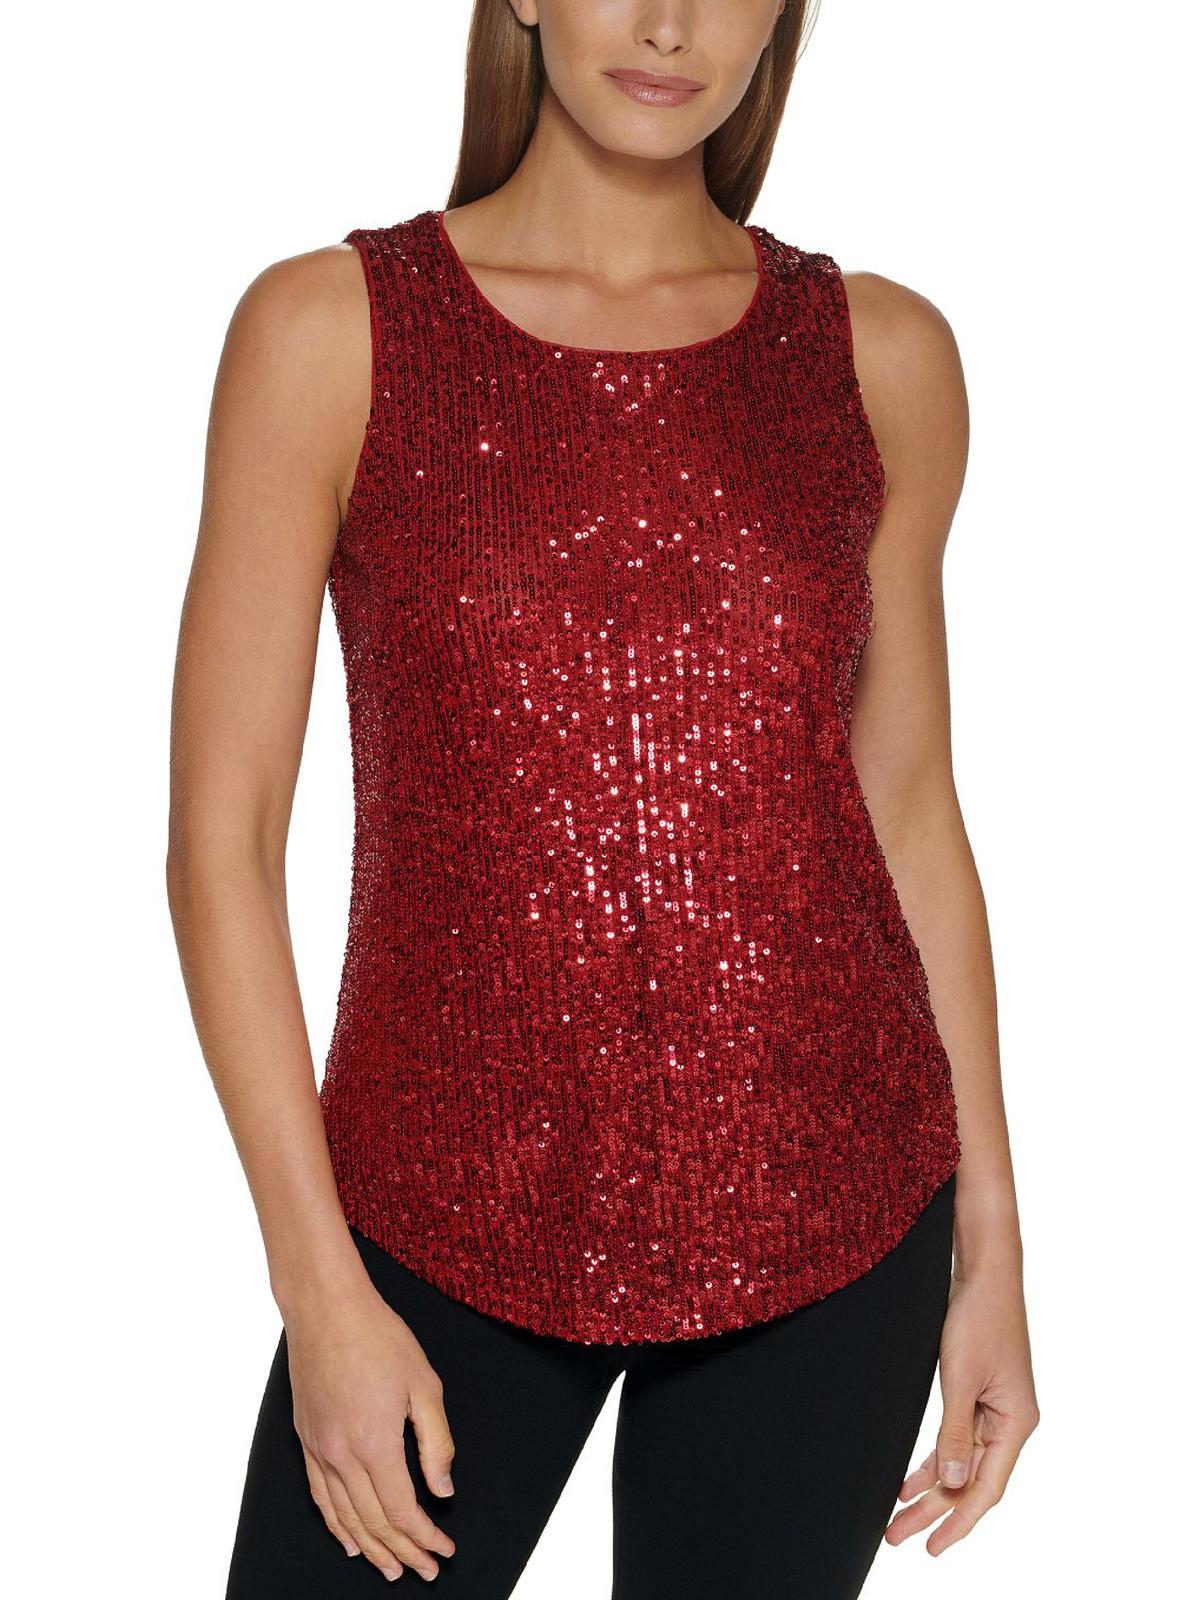 DKNY Womens Sequined Stretch Tank Top